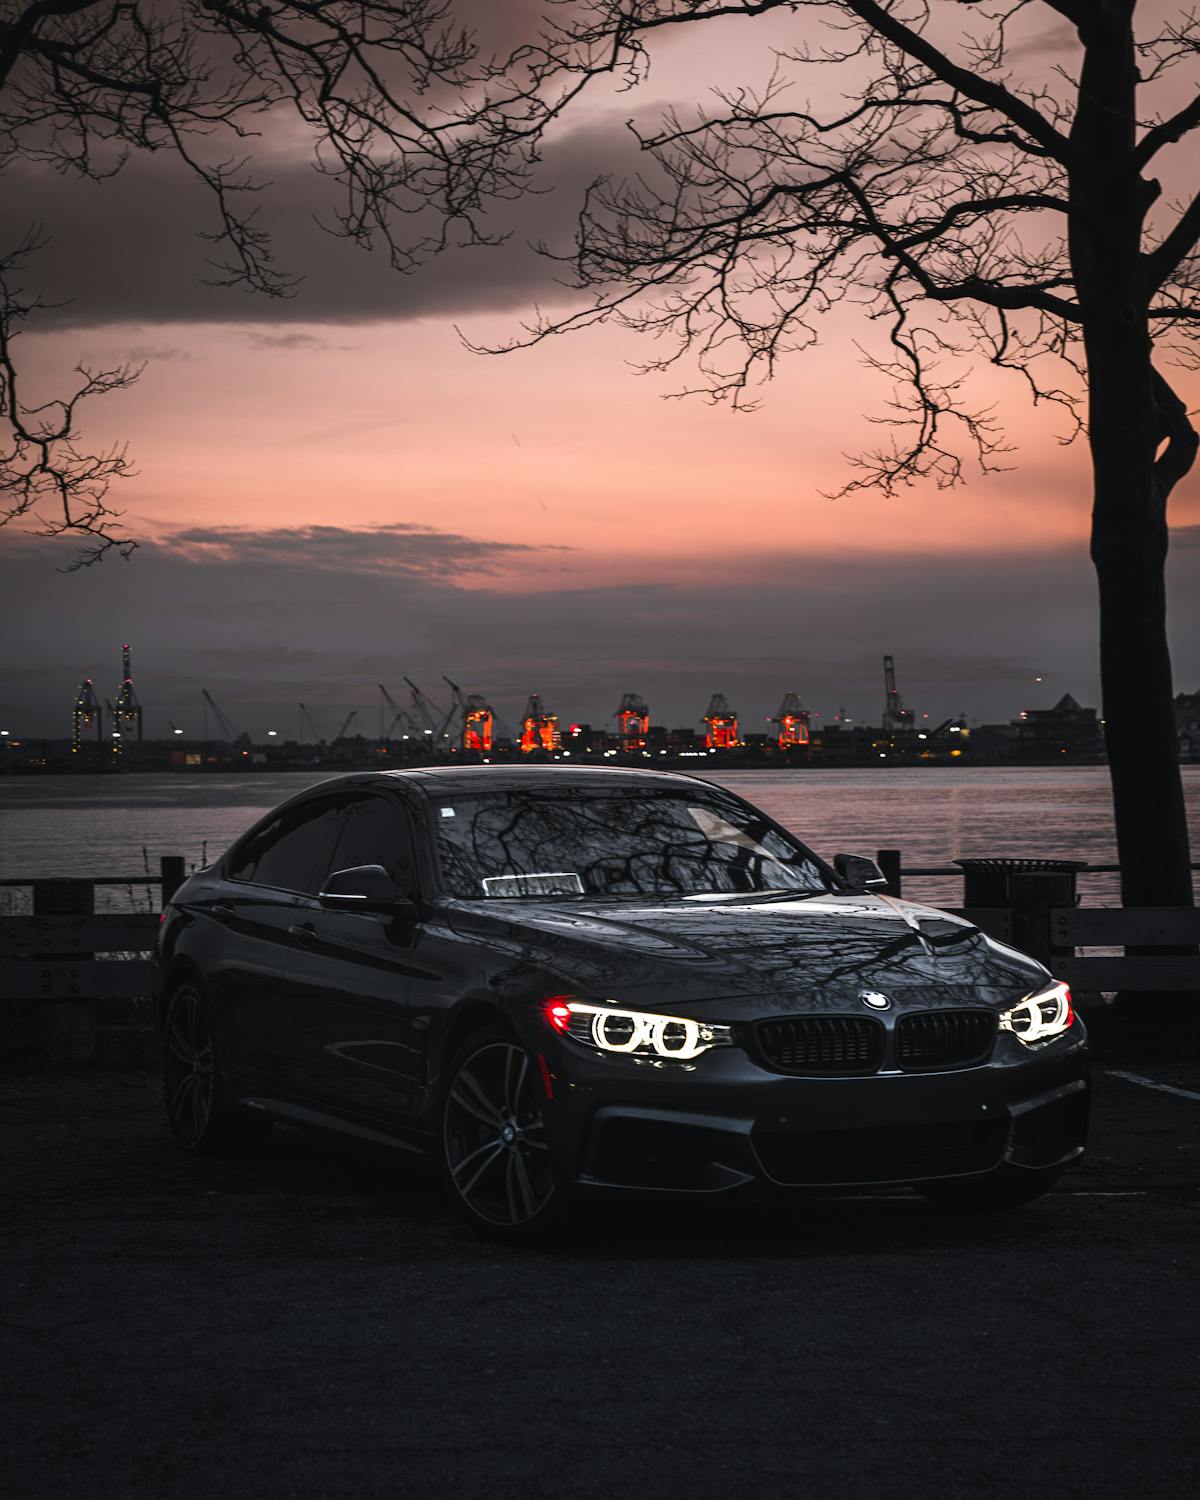 Black Bmw M 3 Parked on Parking Lot during Sunset · Free Stock Photo